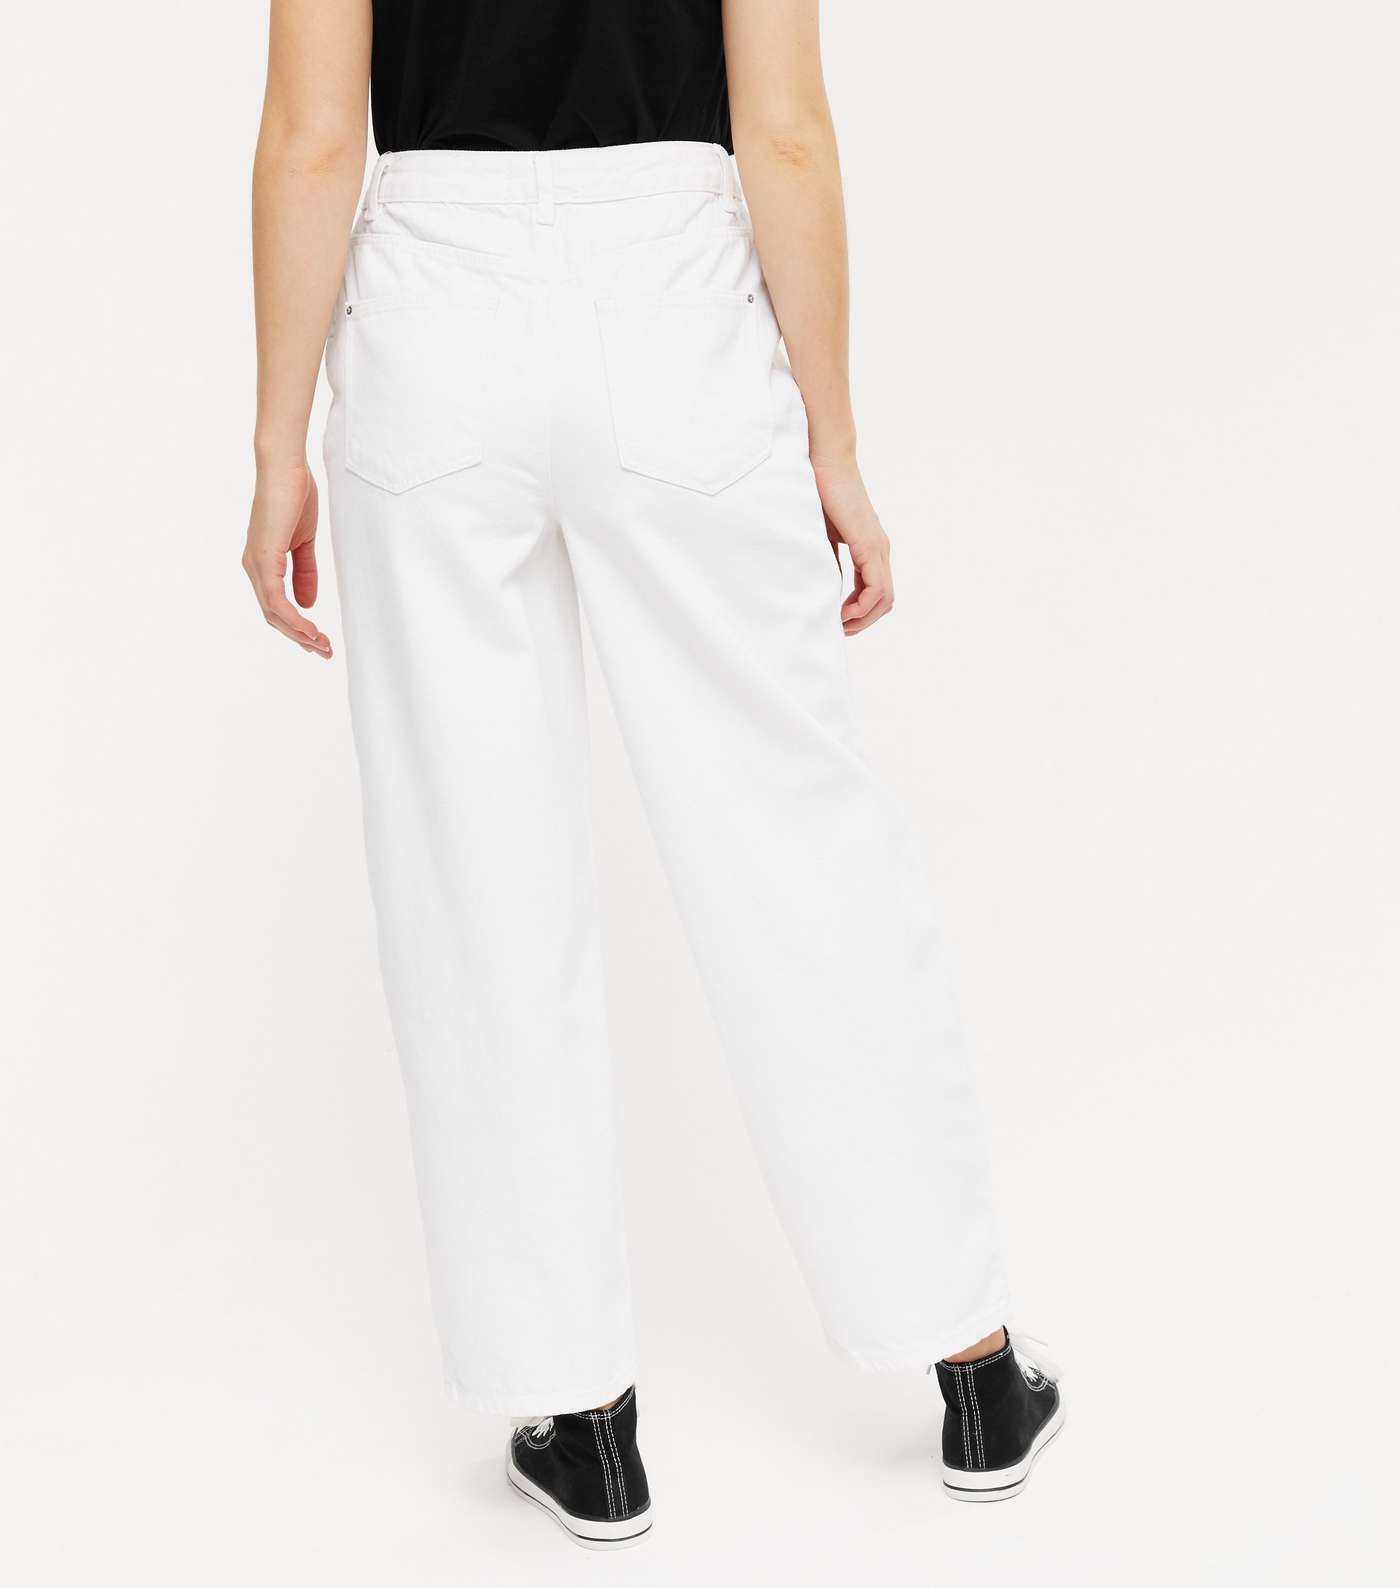 Urban Bliss White 90s Baggy Fit Jeans Image 4